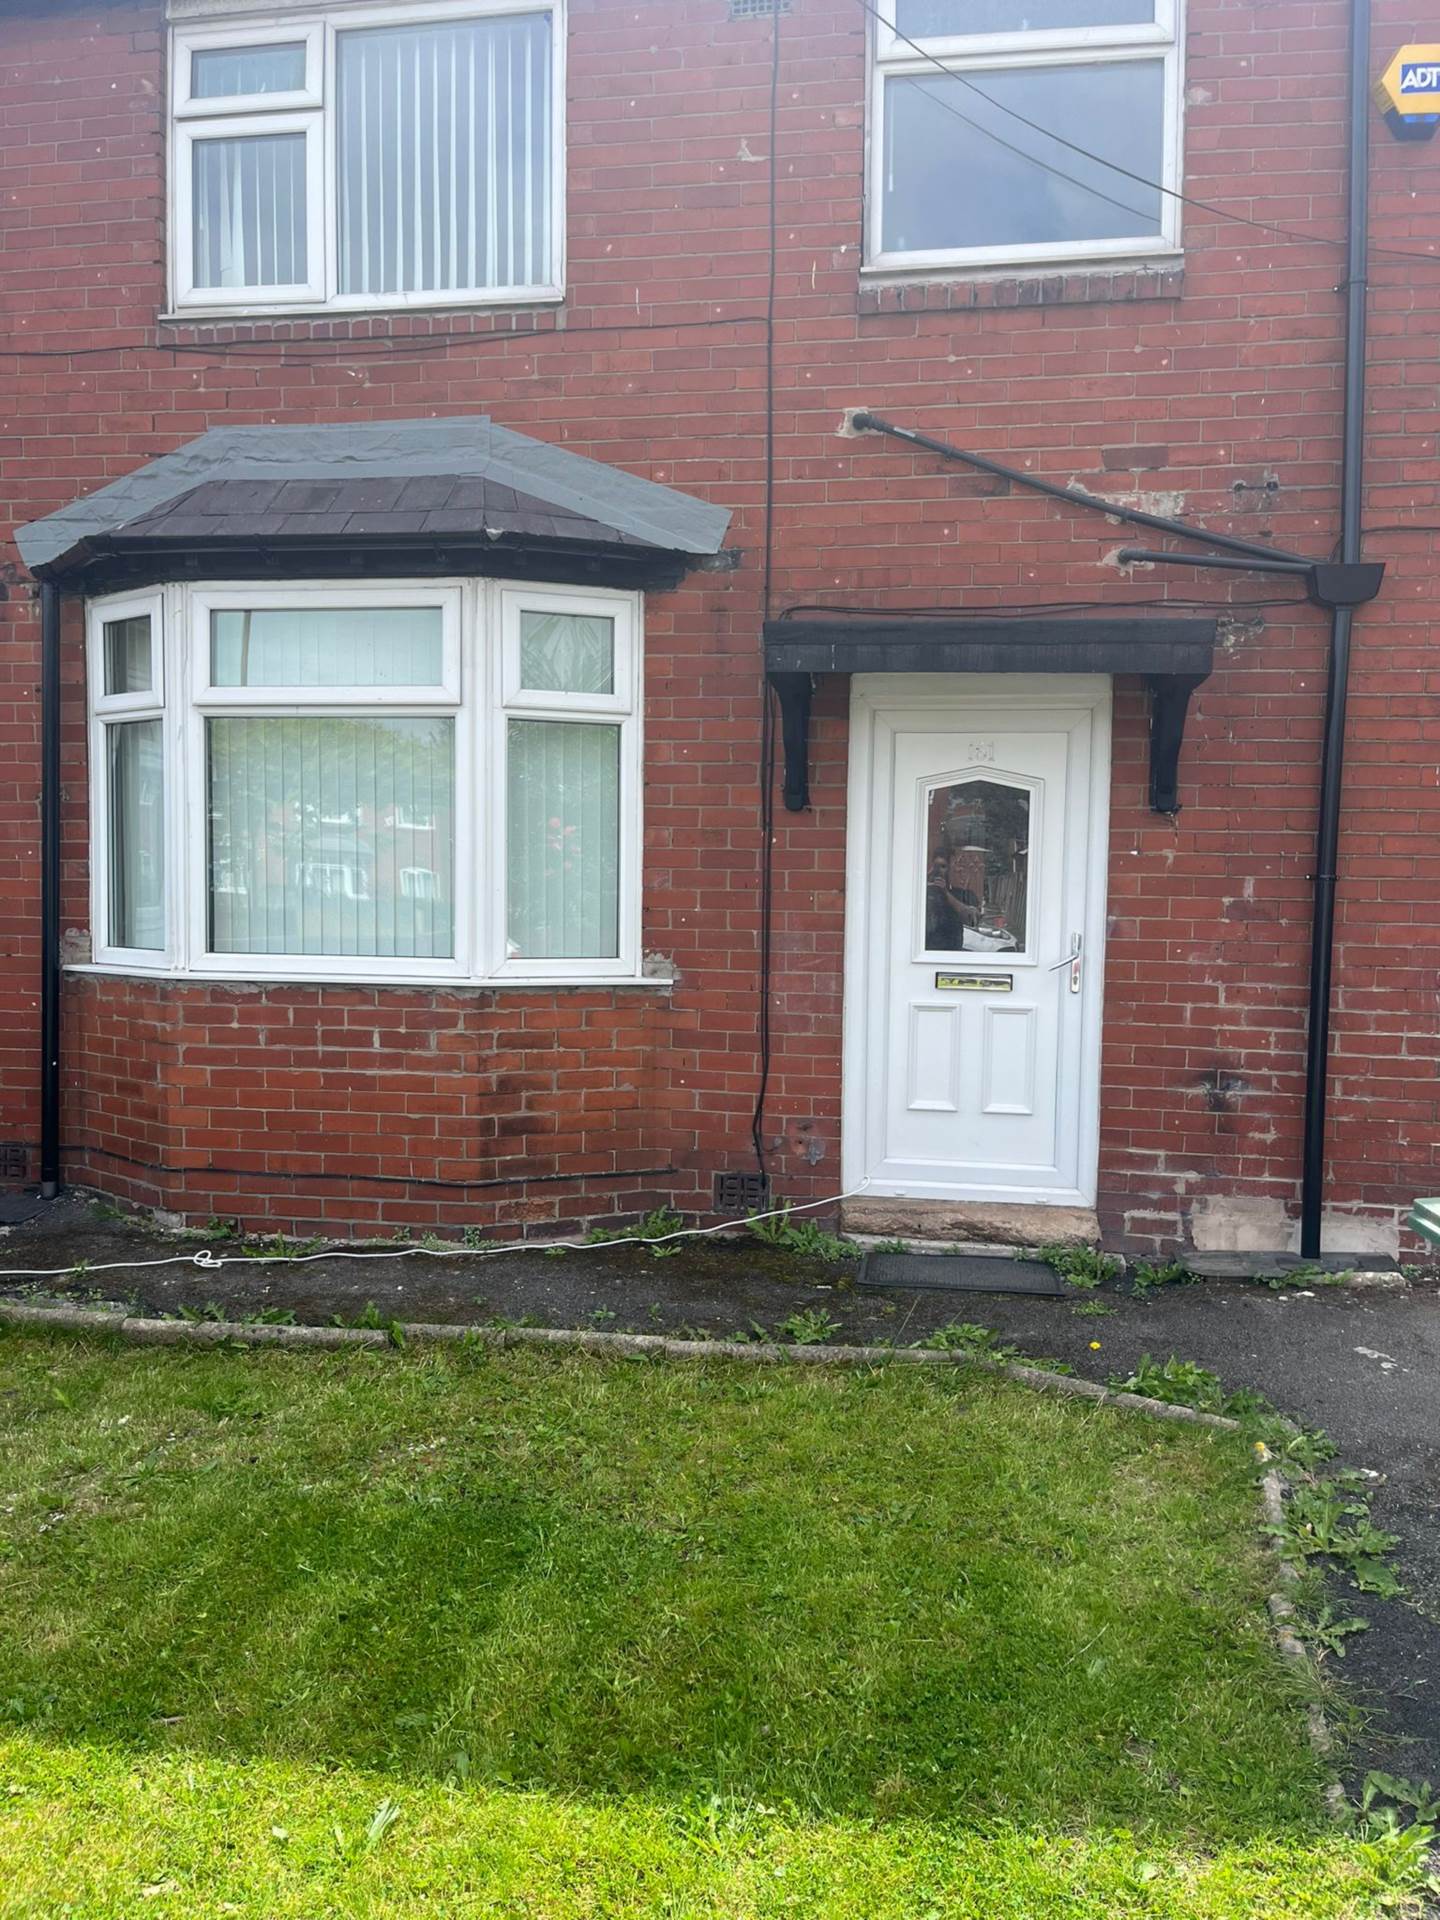 4 bed Semi-Detached House for rent in Manchester. From Ur Place